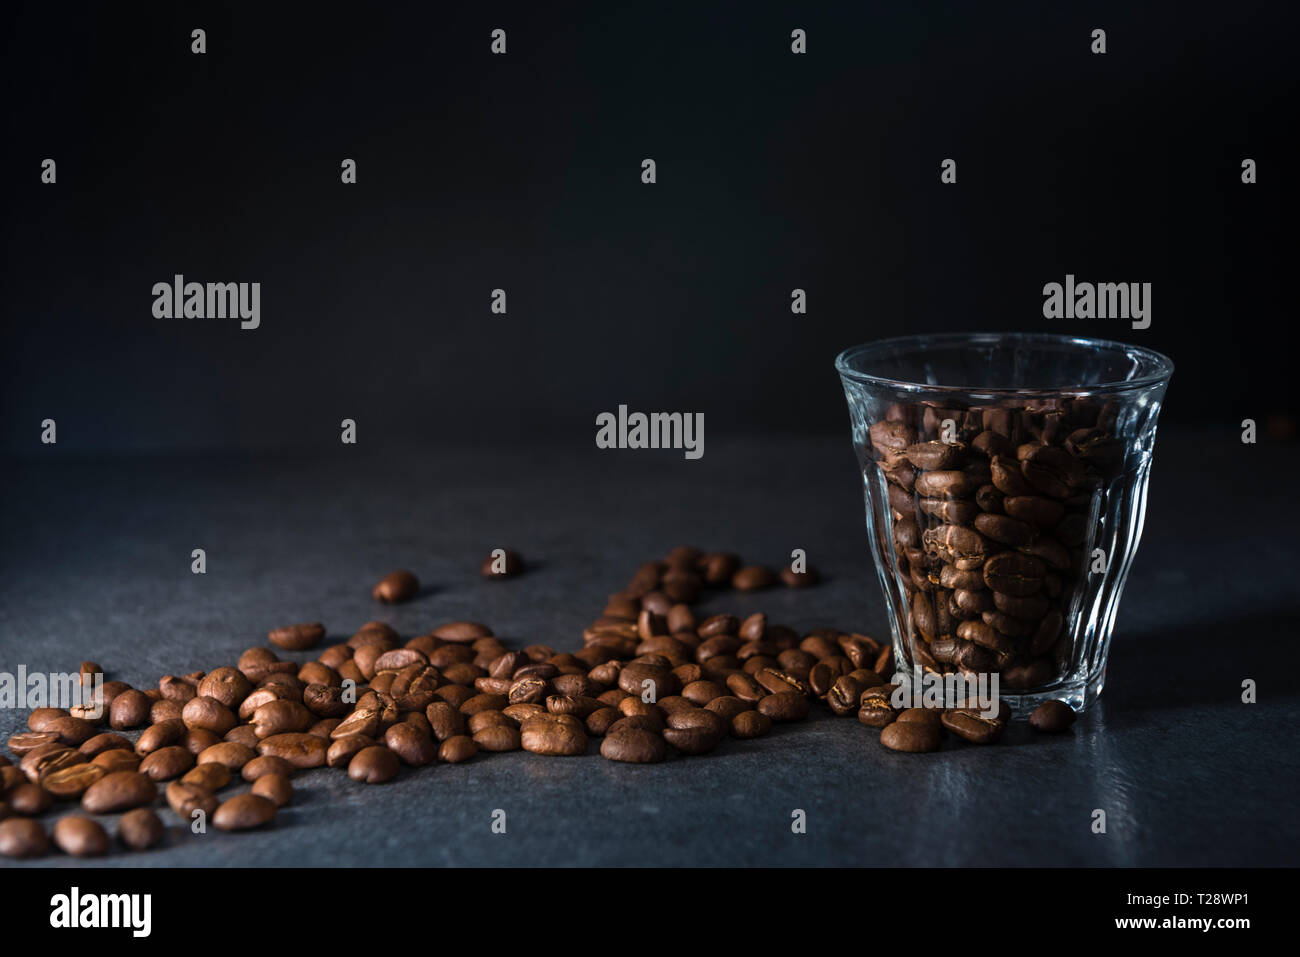 Coffee beans in glass on dark background with copy space, low key image Stock Photo